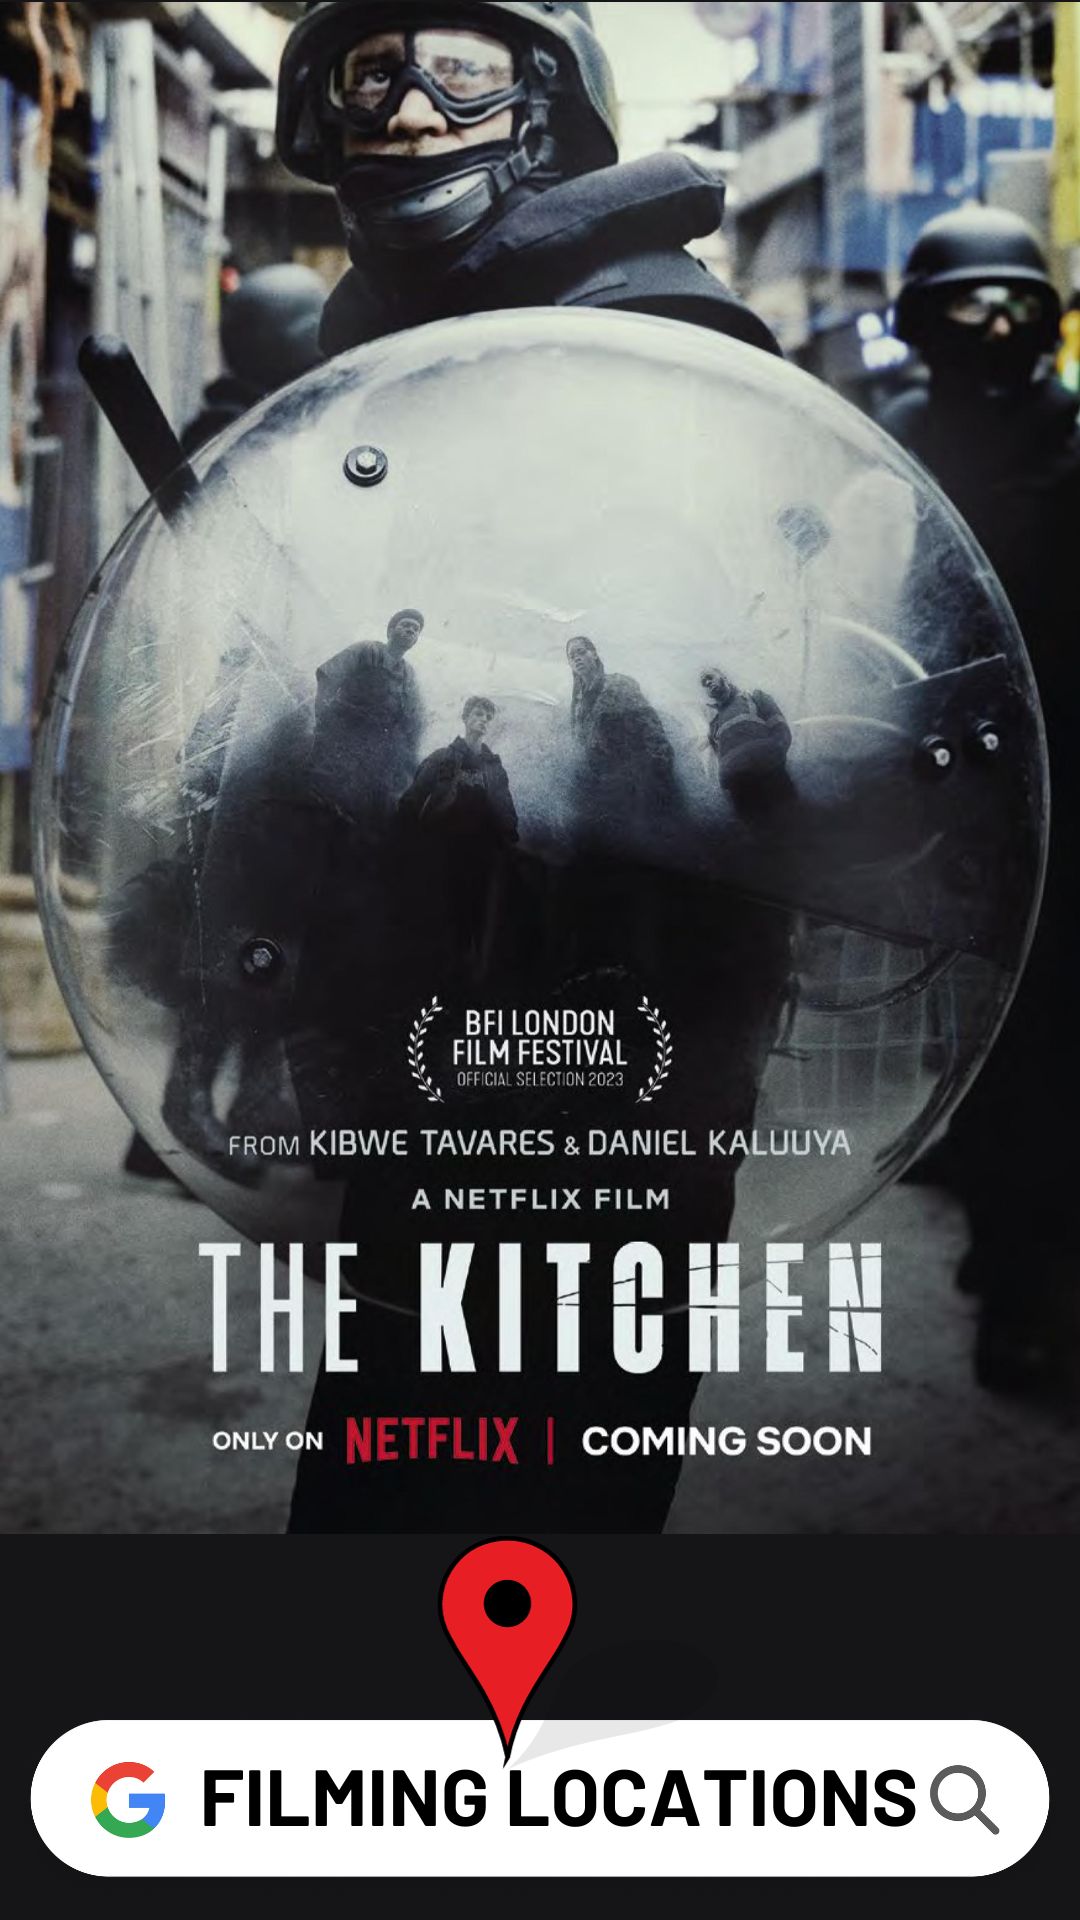 The Kitchen Filming Locations